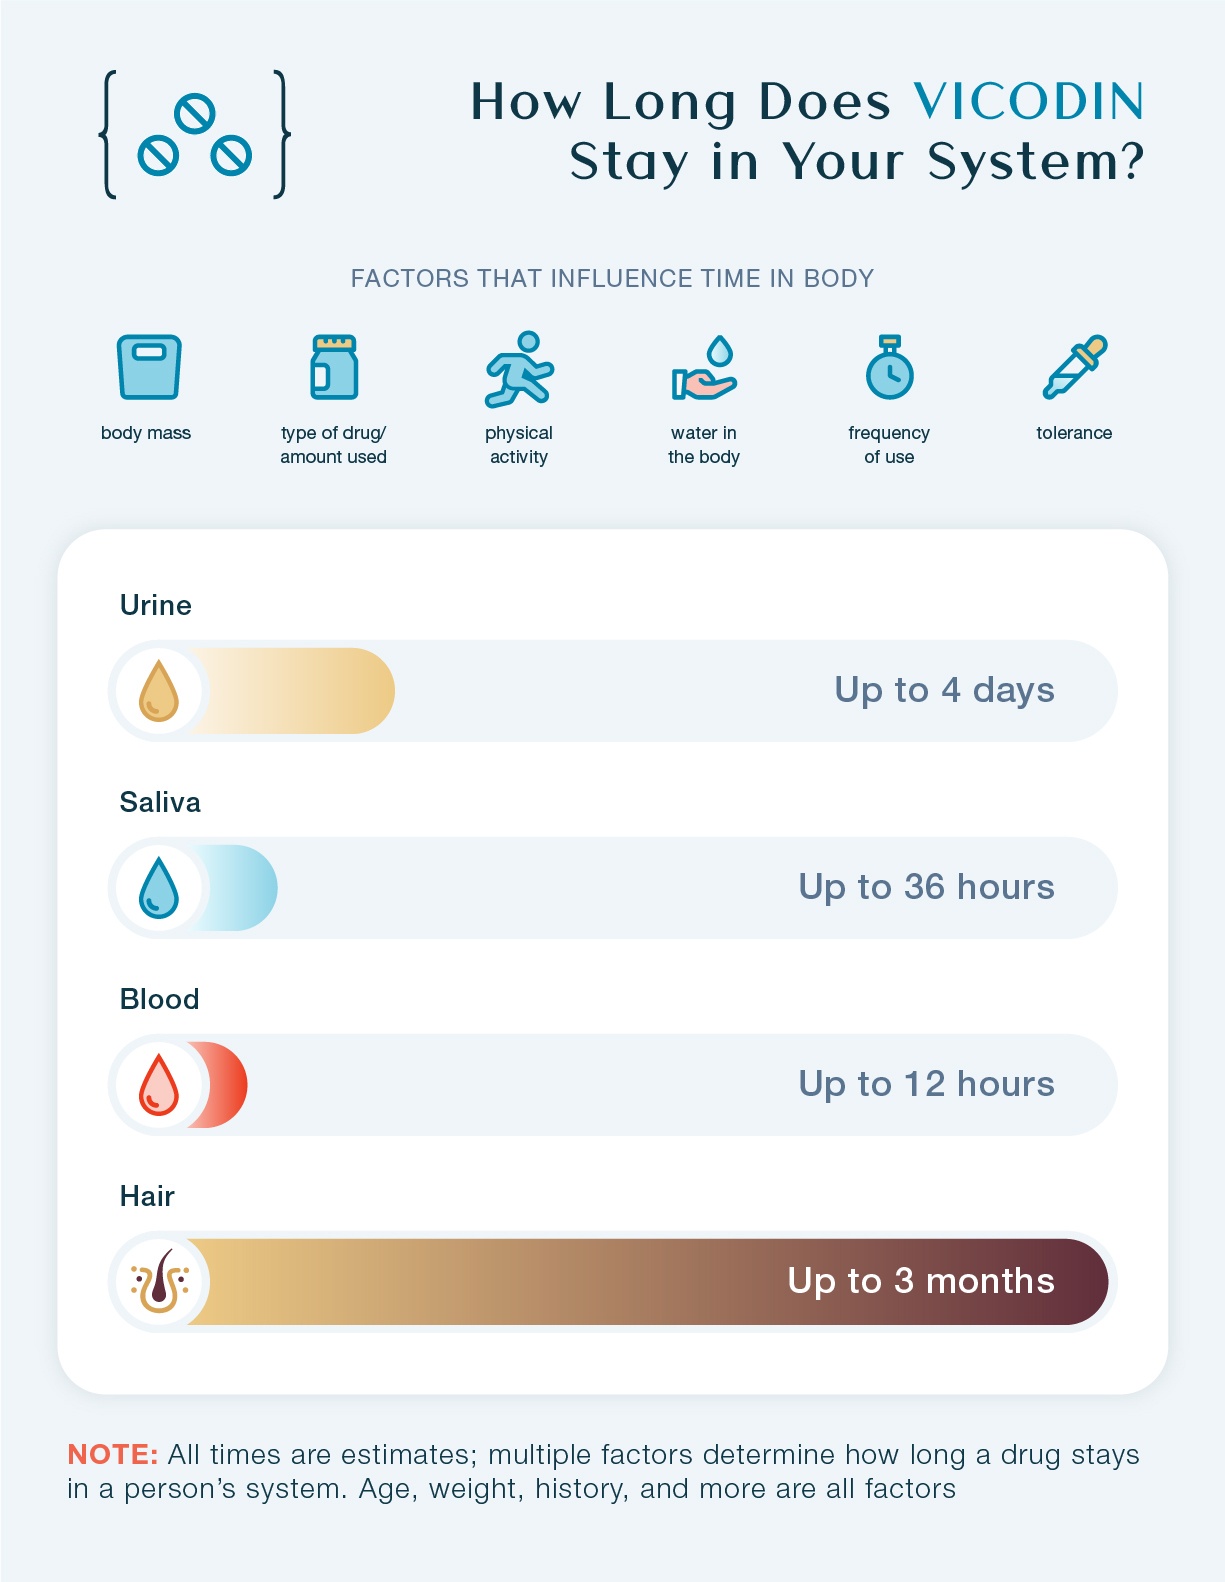 How long does Vicodin stay in your system? This chart shows how long Vicodin stays in urine, saliva, blood, and hair